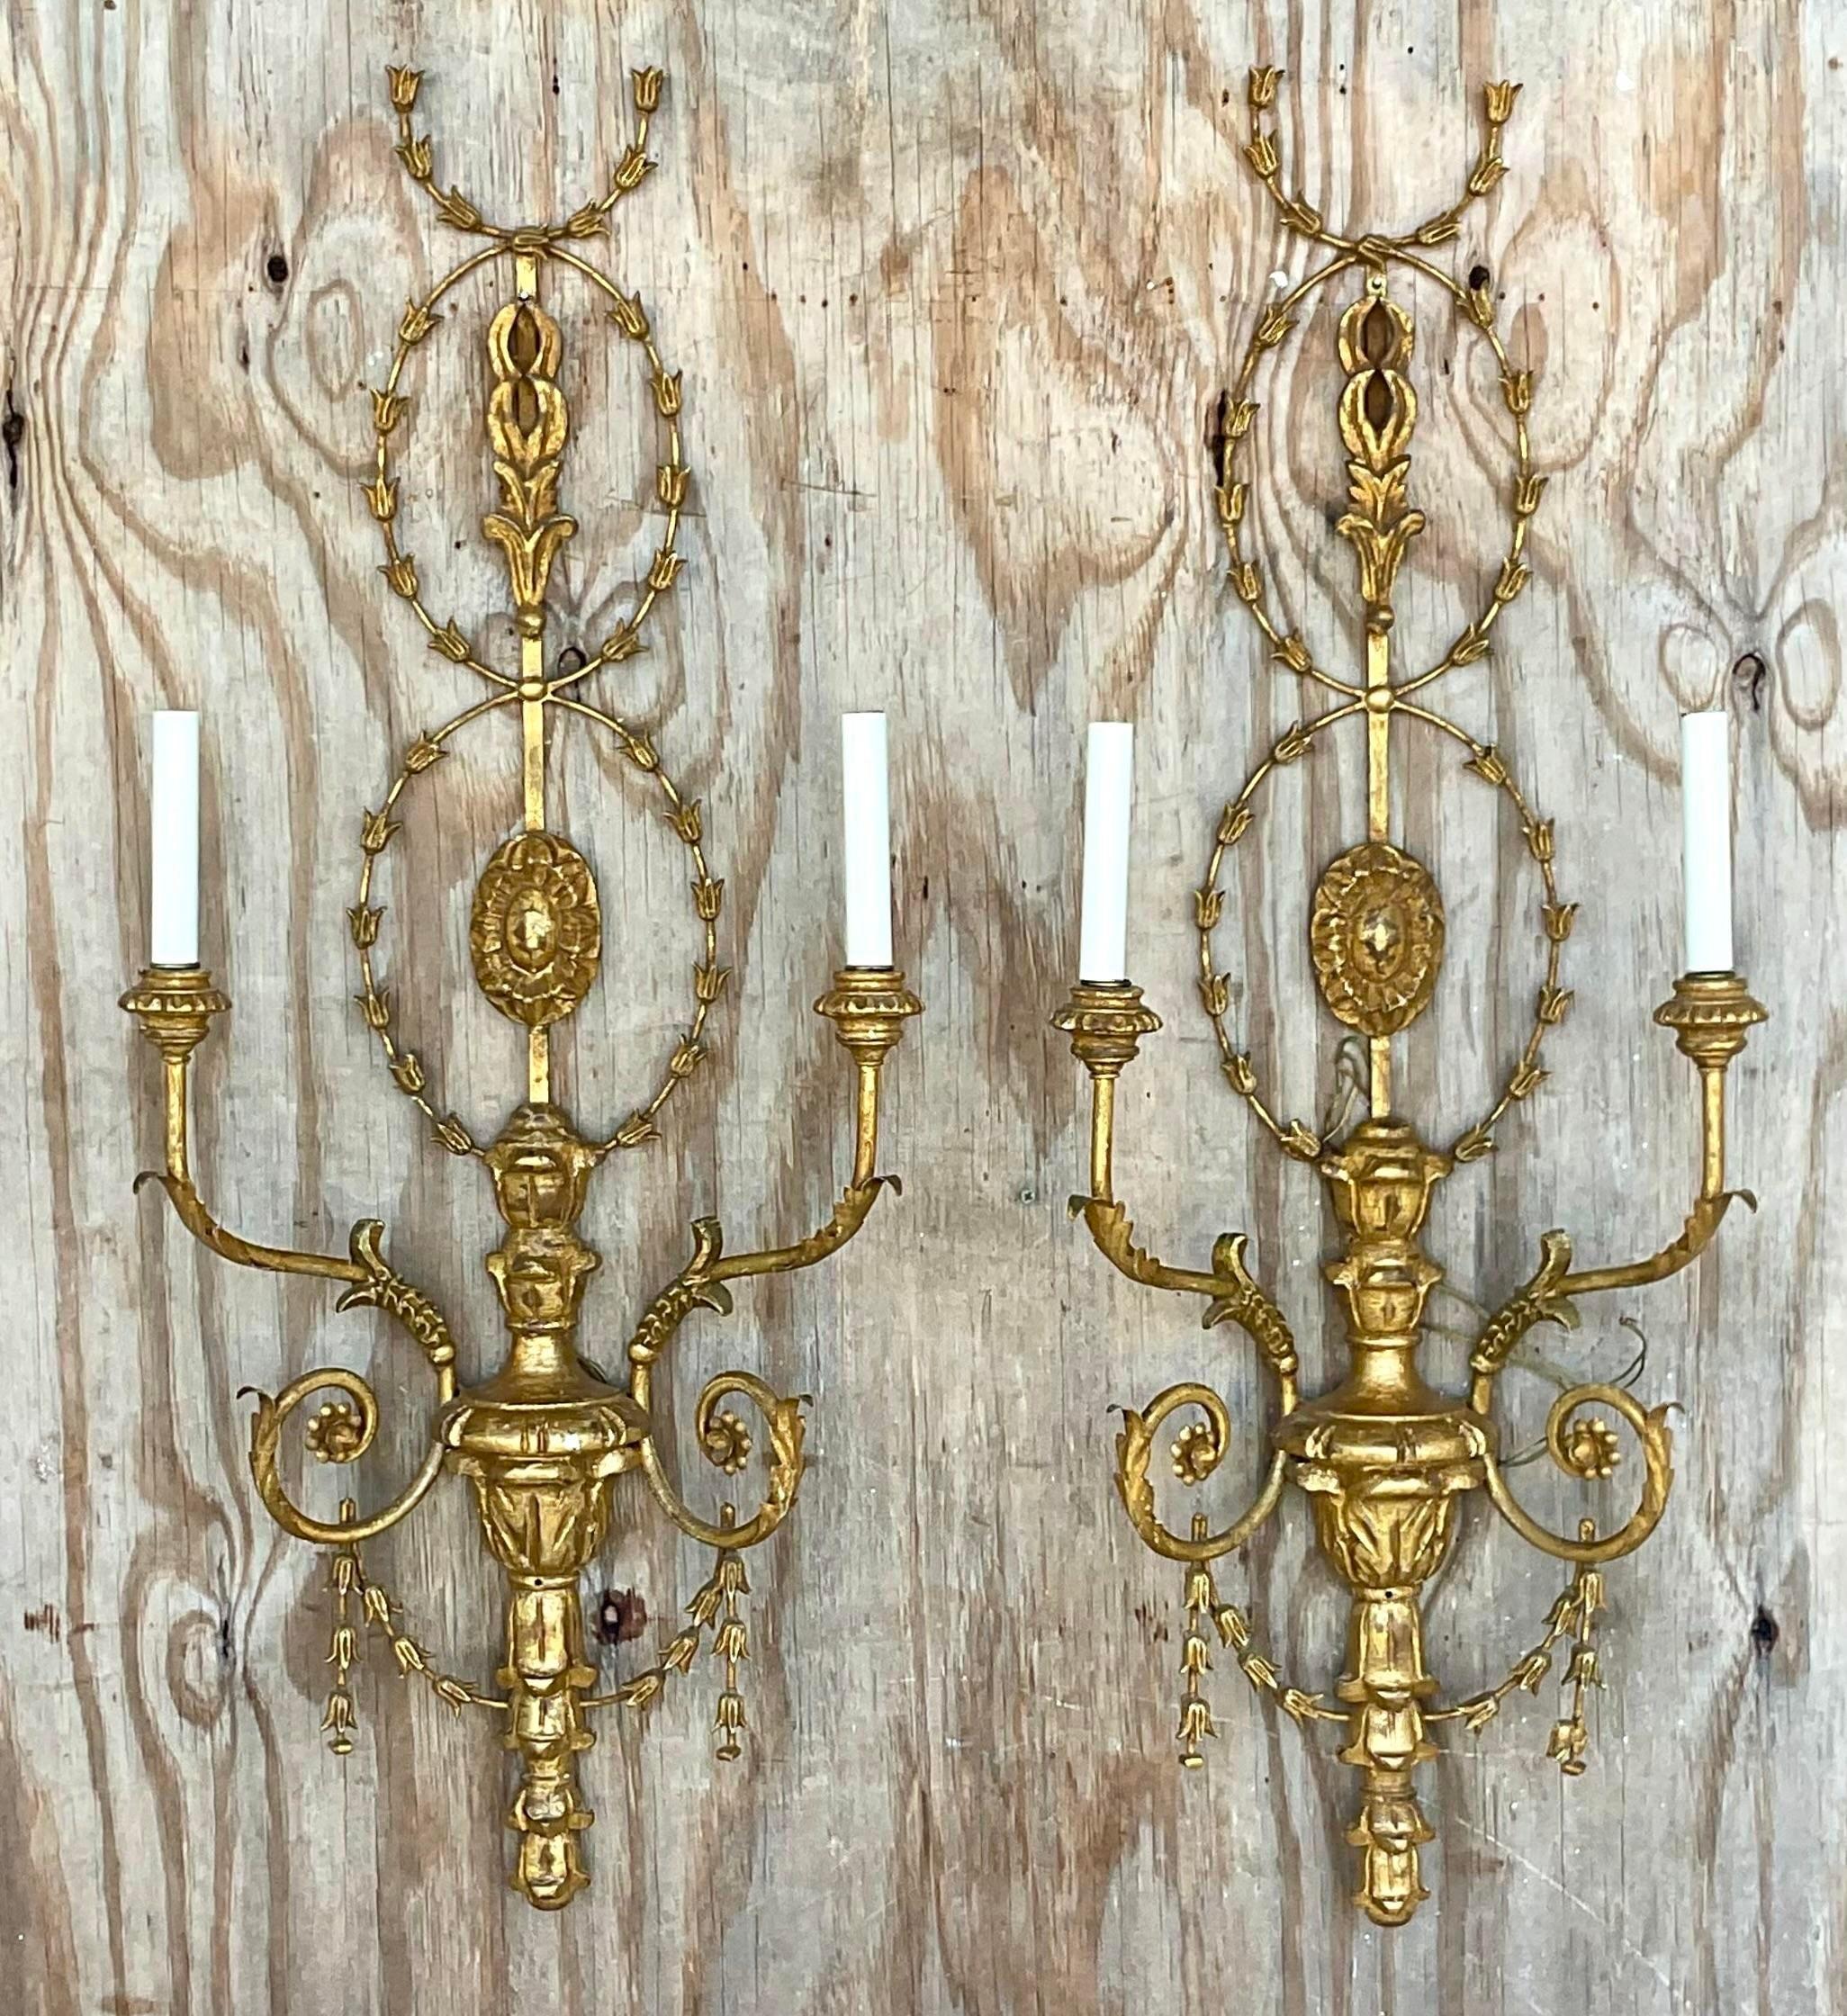 20th Century Vintage Regency Gilt Wood Garland Wall Sconces - a Pair For Sale